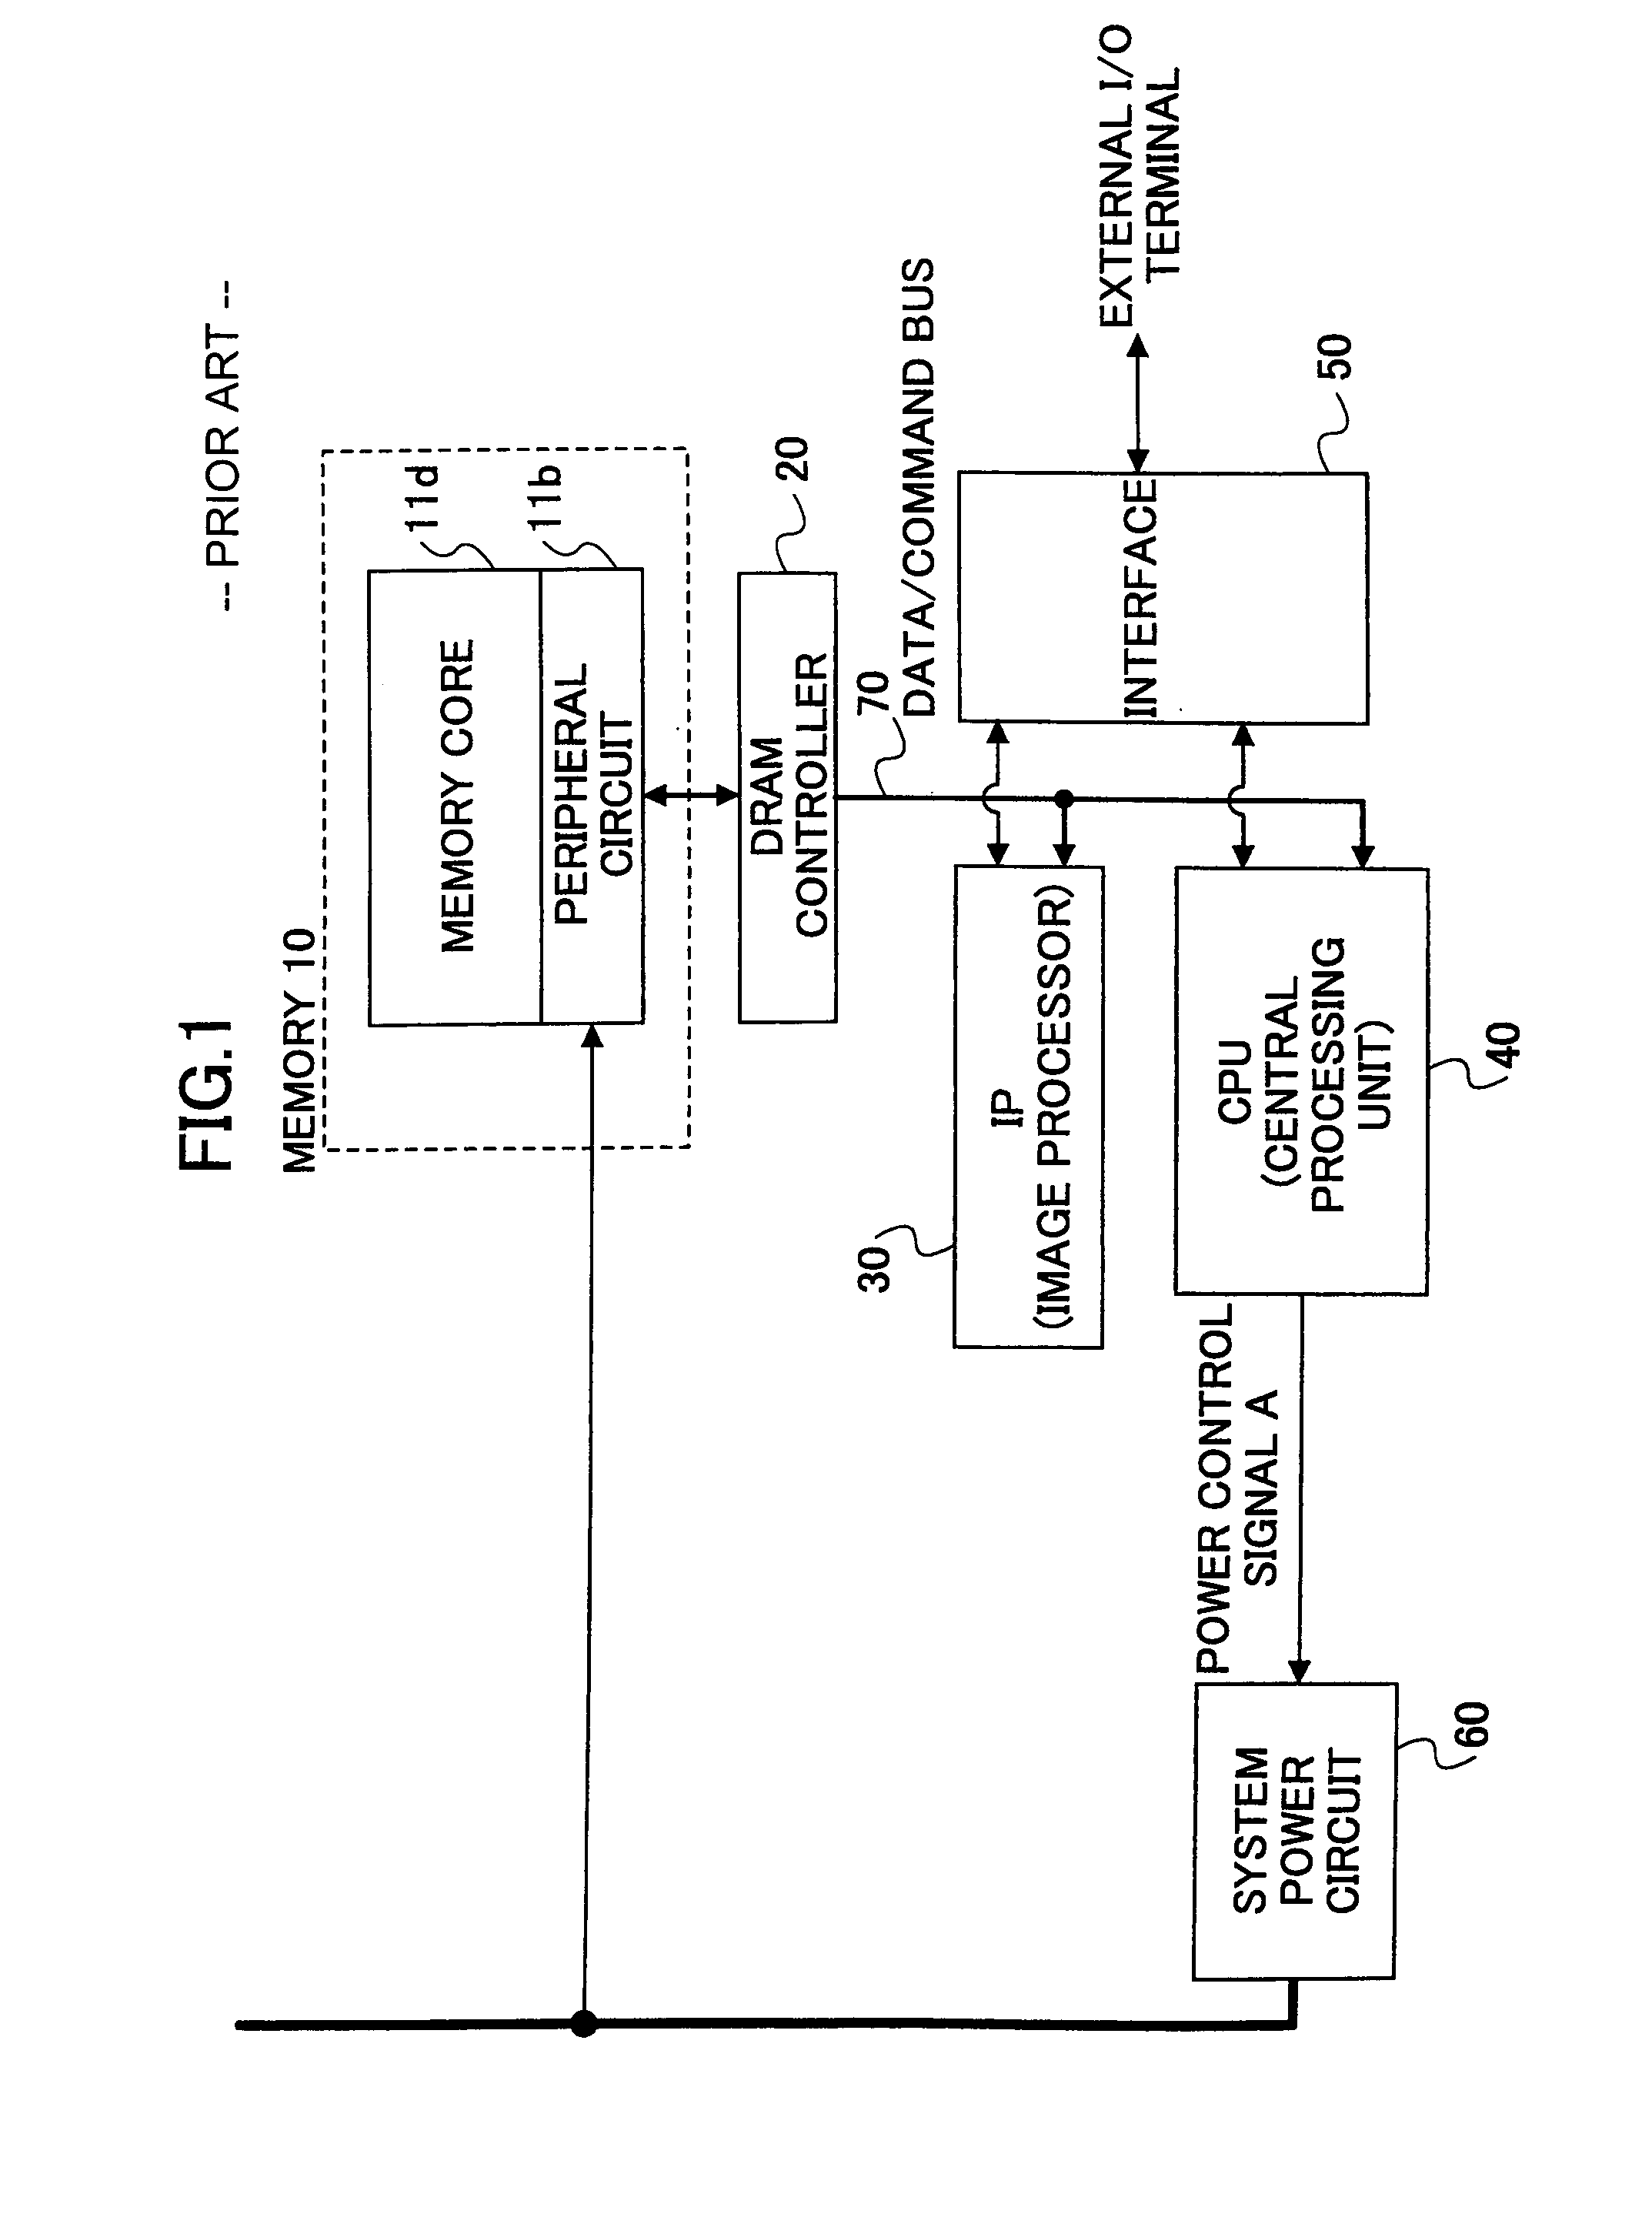 Apparatus to reduce the internal frequency of an integrated circuit by detecting a drop in the voltage and frequency